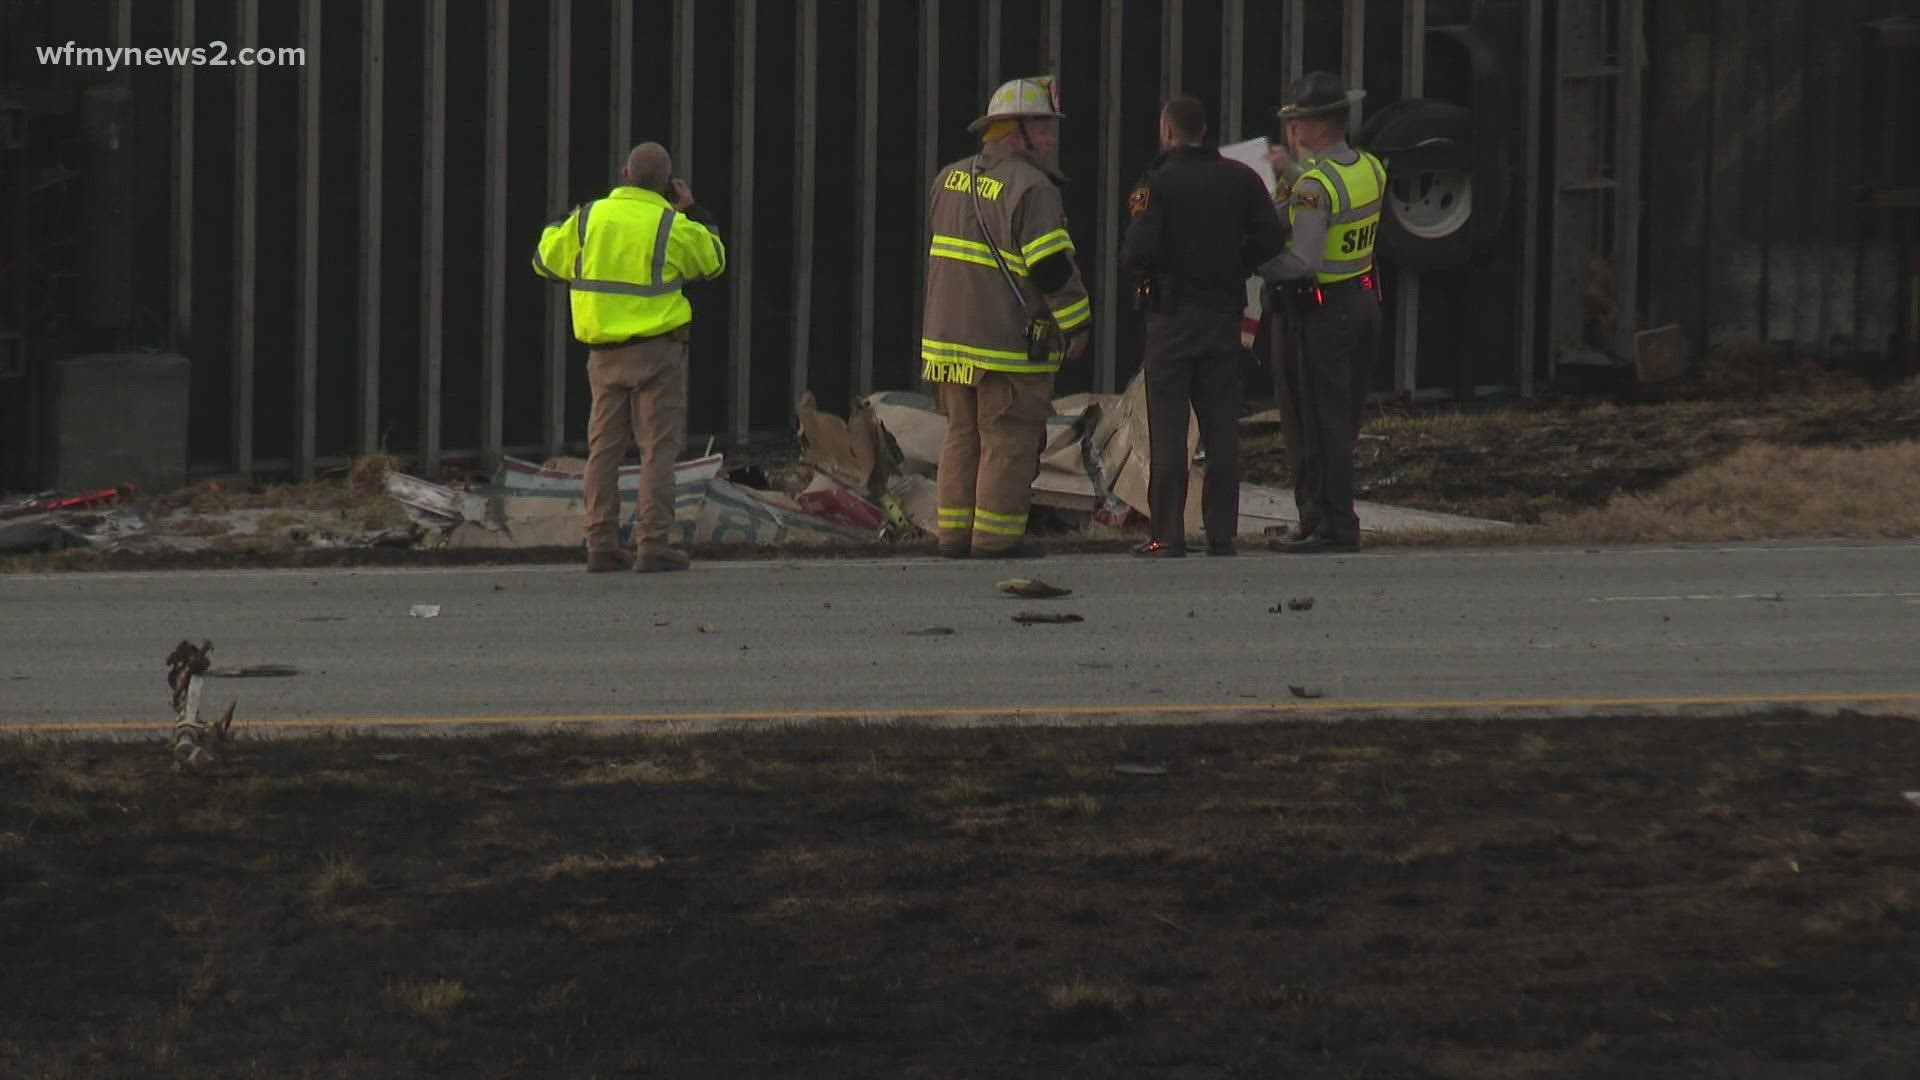 The pilot, identified as 43-year-old Raymond Ackley of Charlotte, died on the scene.